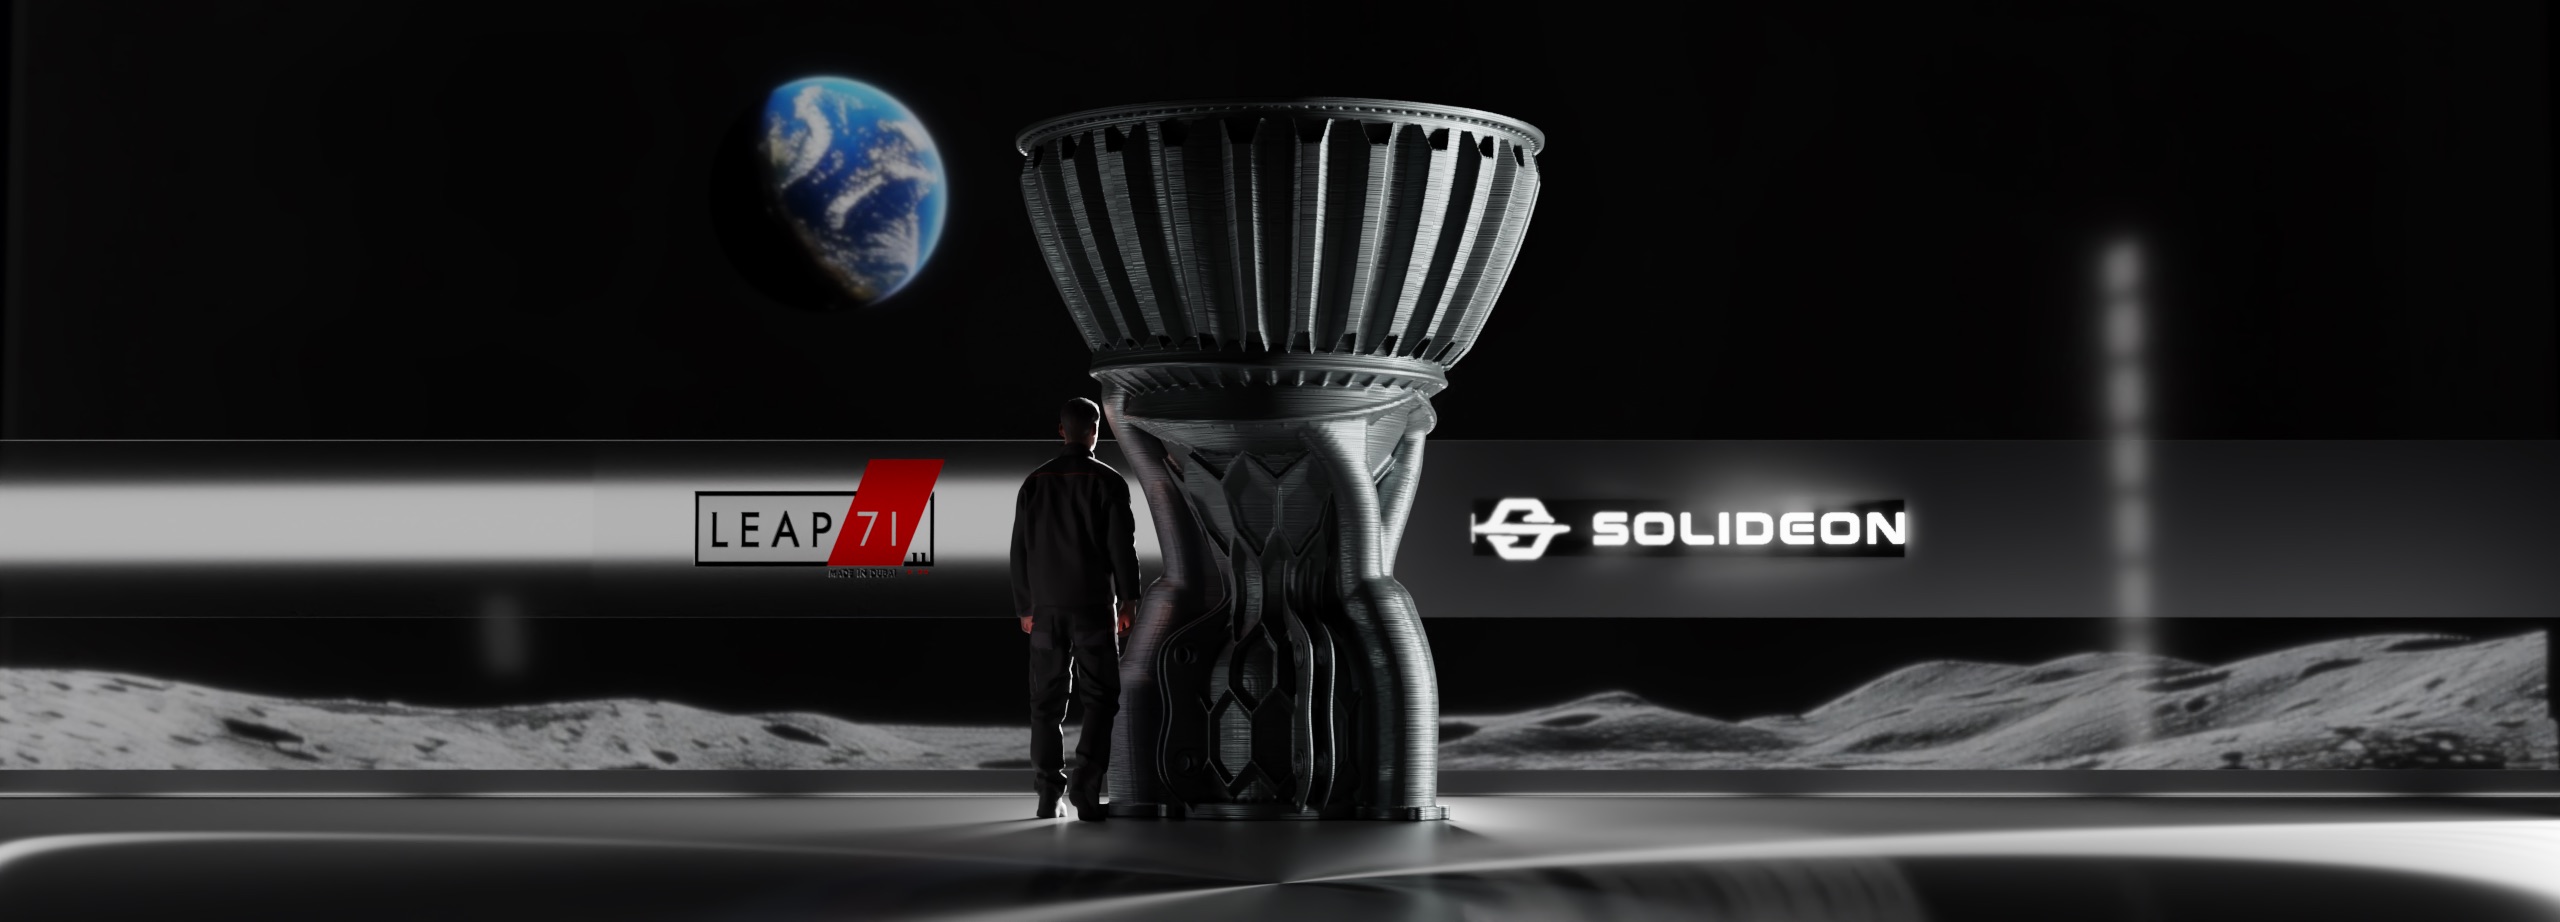 Solideon and LEAP 71 collaborate on large-scale 3D-printed space hardware